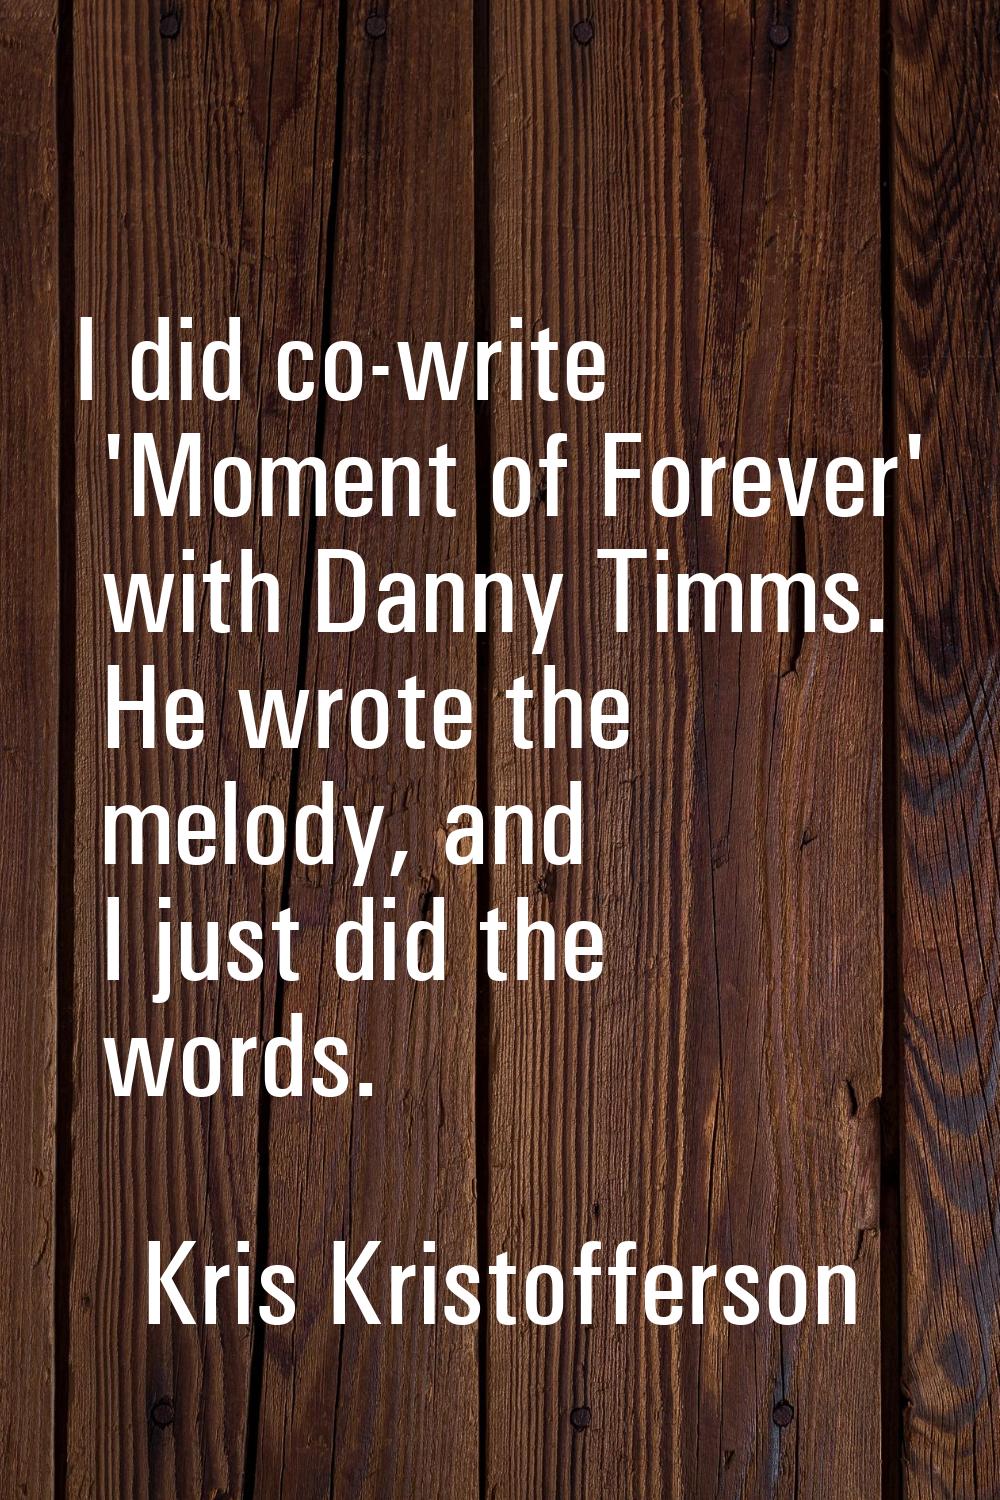 I did co-write 'Moment of Forever' with Danny Timms. He wrote the melody, and I just did the words.